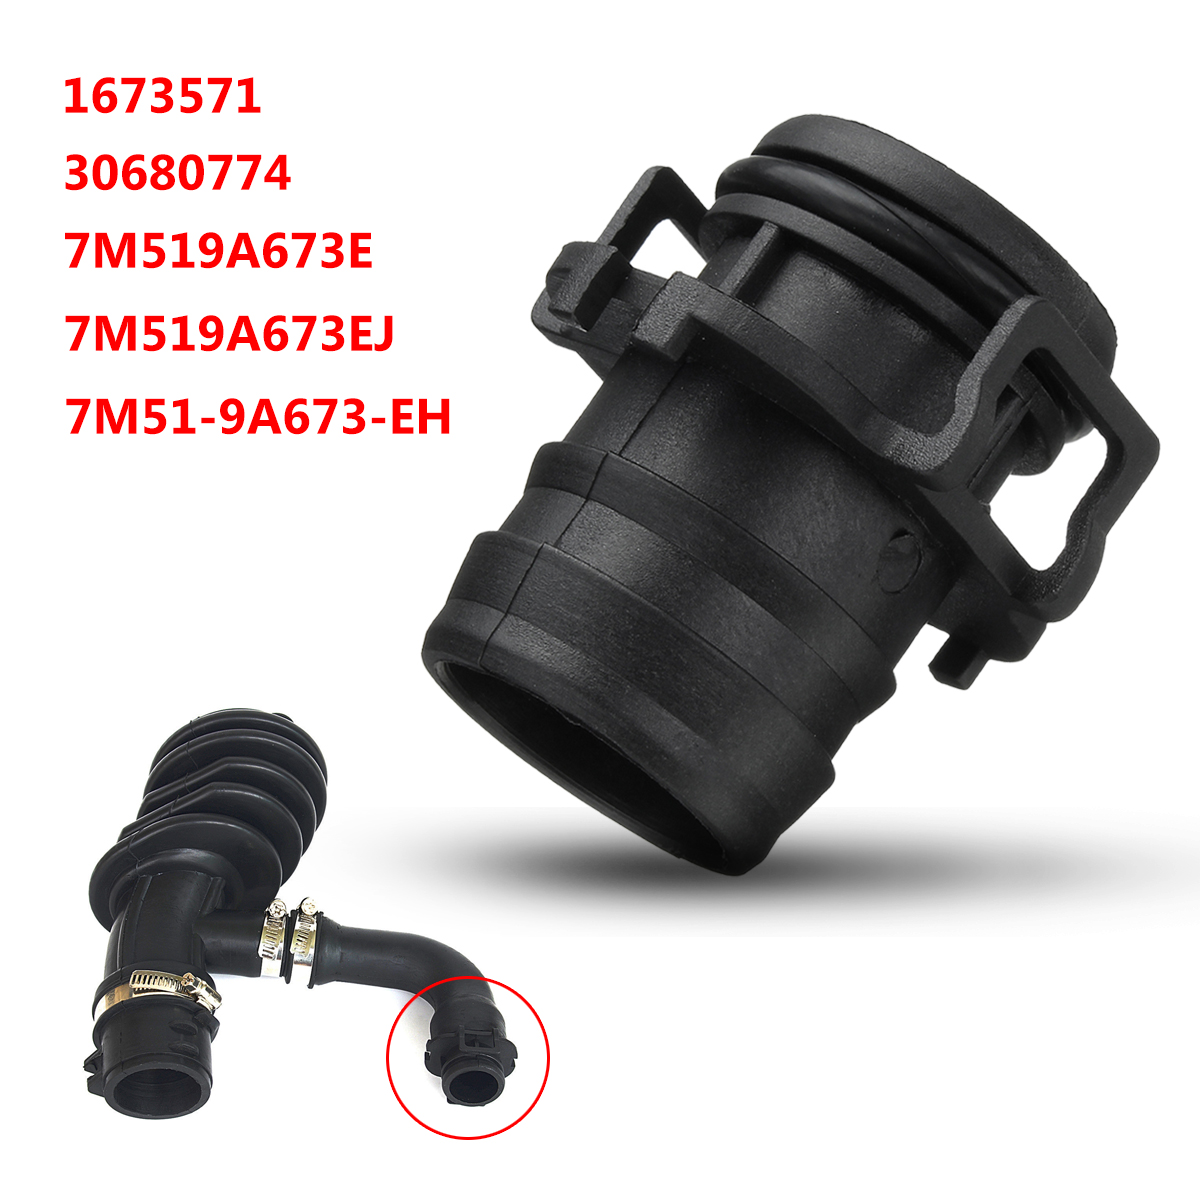 Air-Filter-Flow-Intake-Hose-Pipe-Clip-For-Ford-Focus-C-Max-7M519A673EJ-30680774-1297401